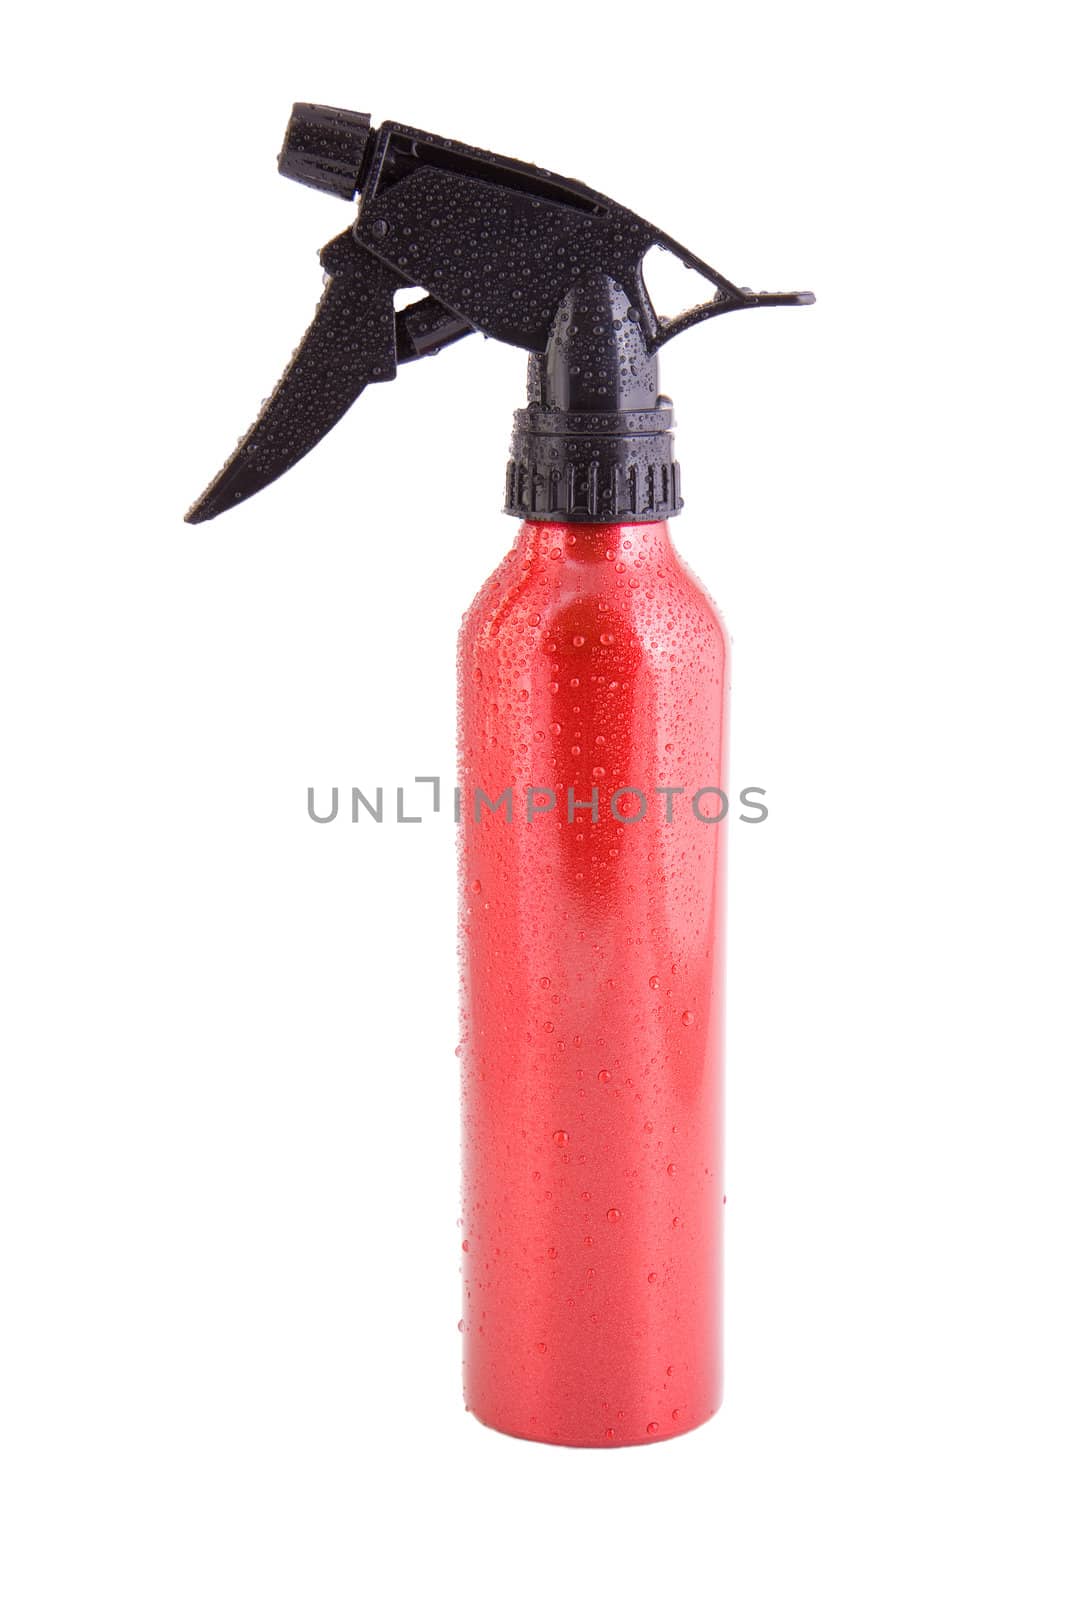 Red metal water sprayer isolated on white